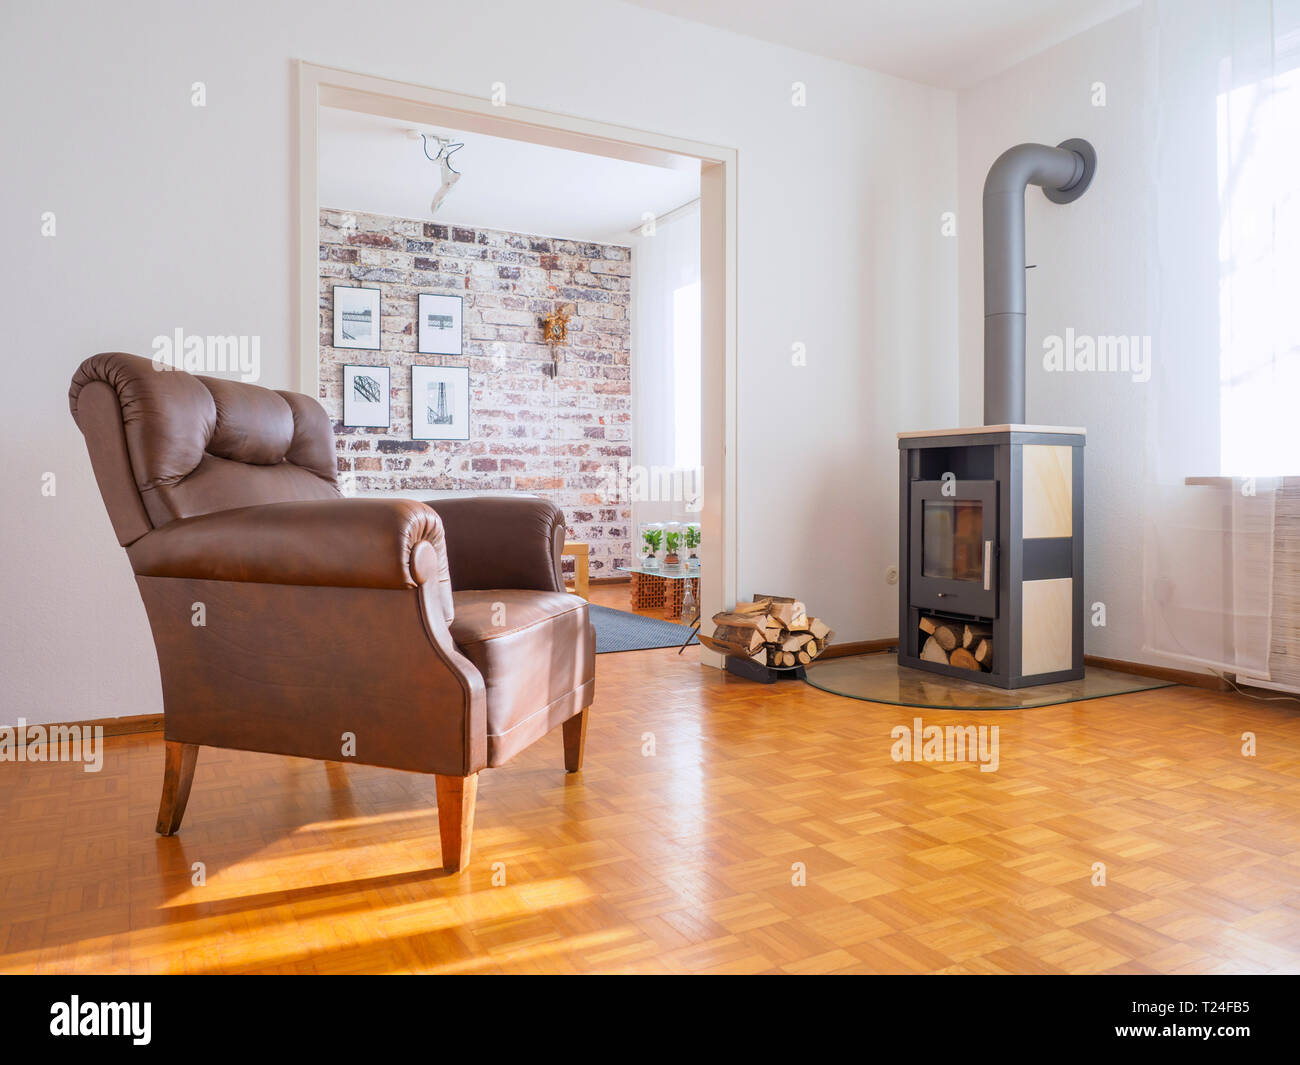 Germany, modern living room, leather chair and fireplace Stock Photo